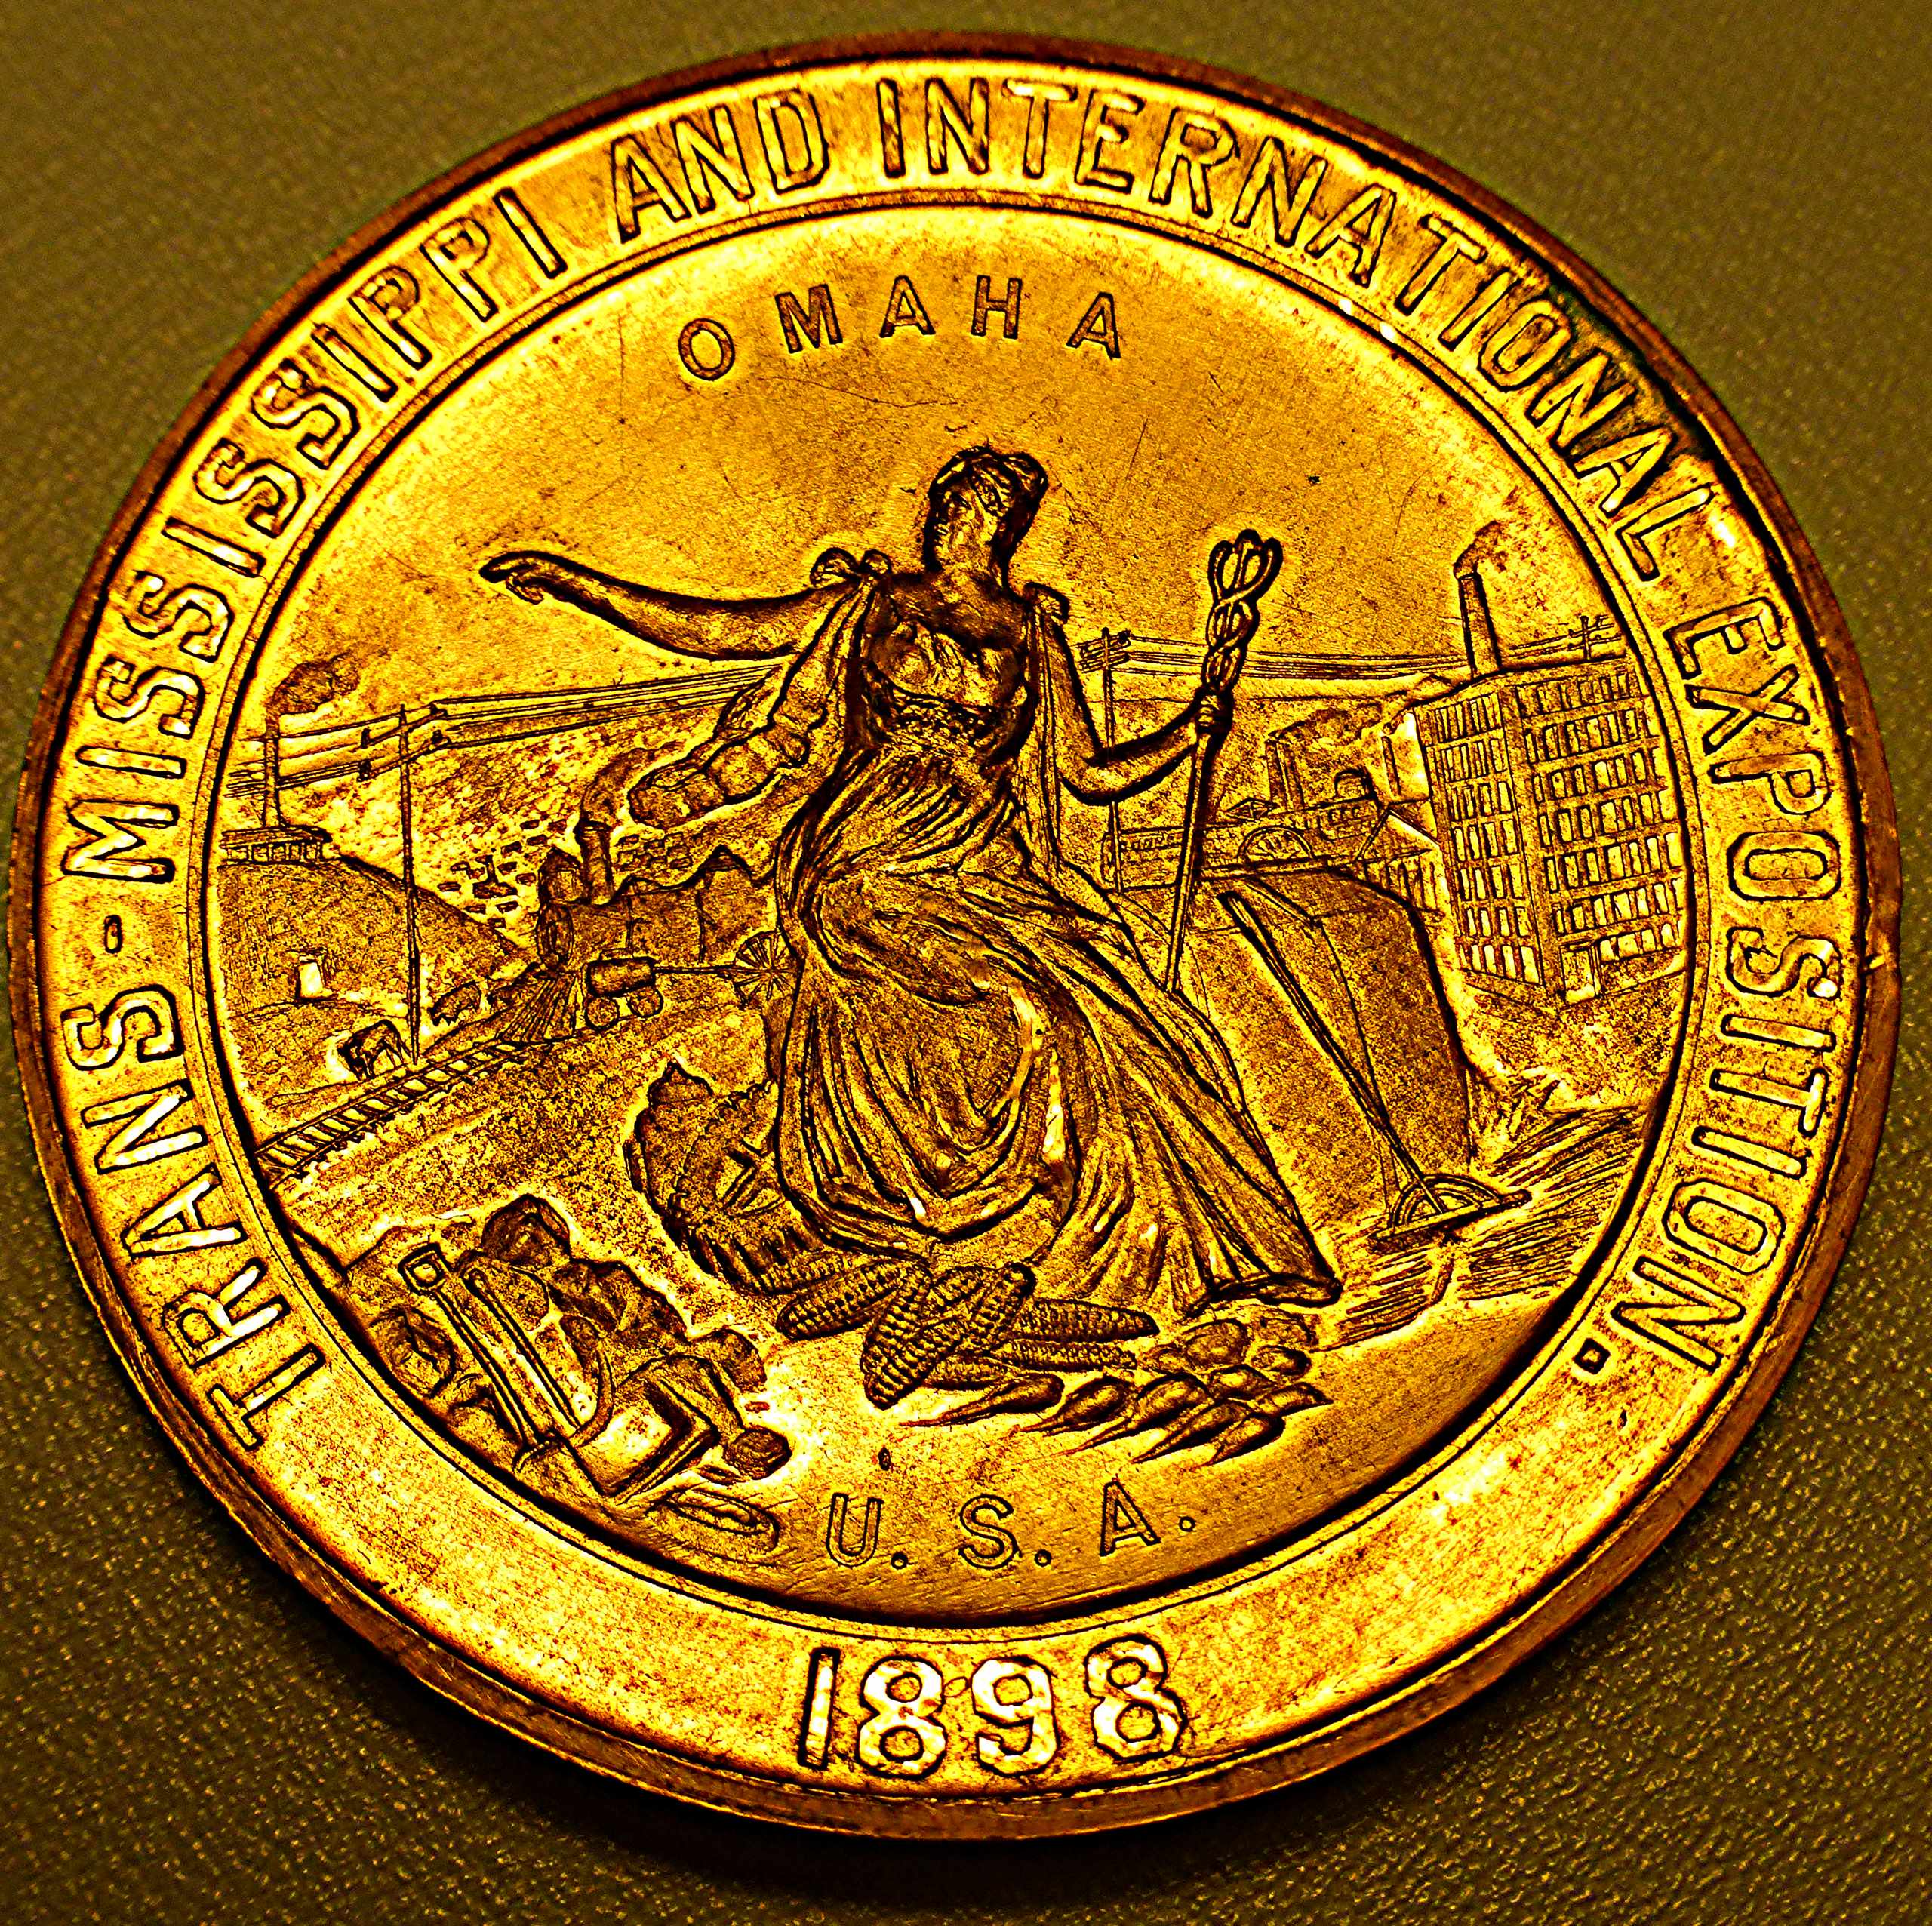 1898 Trans-Mississippi Exposition Medals – Omaha World’s Fair Collectibles